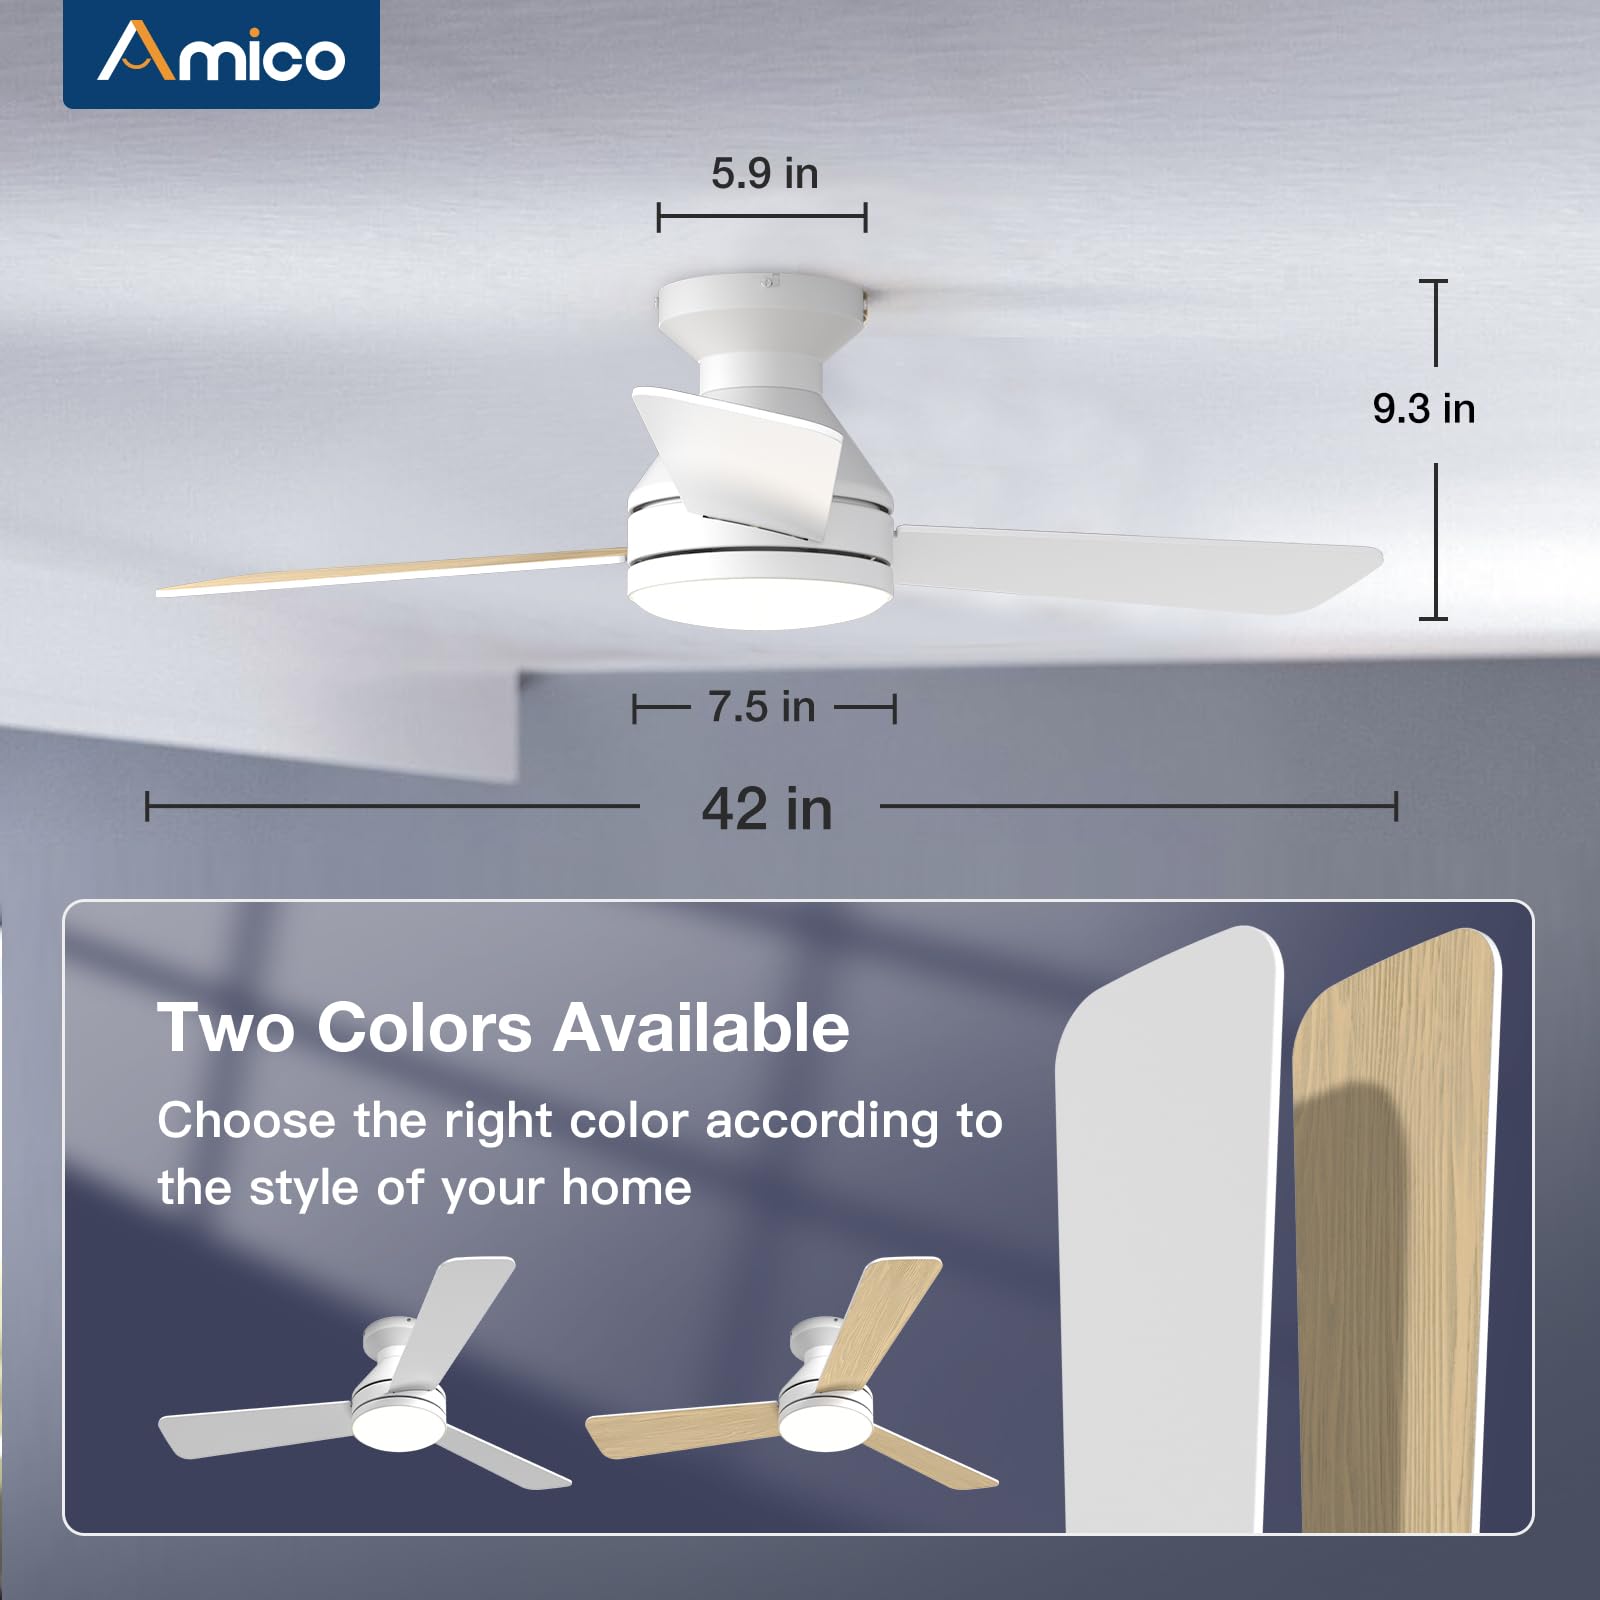 Amico Ceiling Fans with Lights, 42 inch Low Profile Ceiling Fan